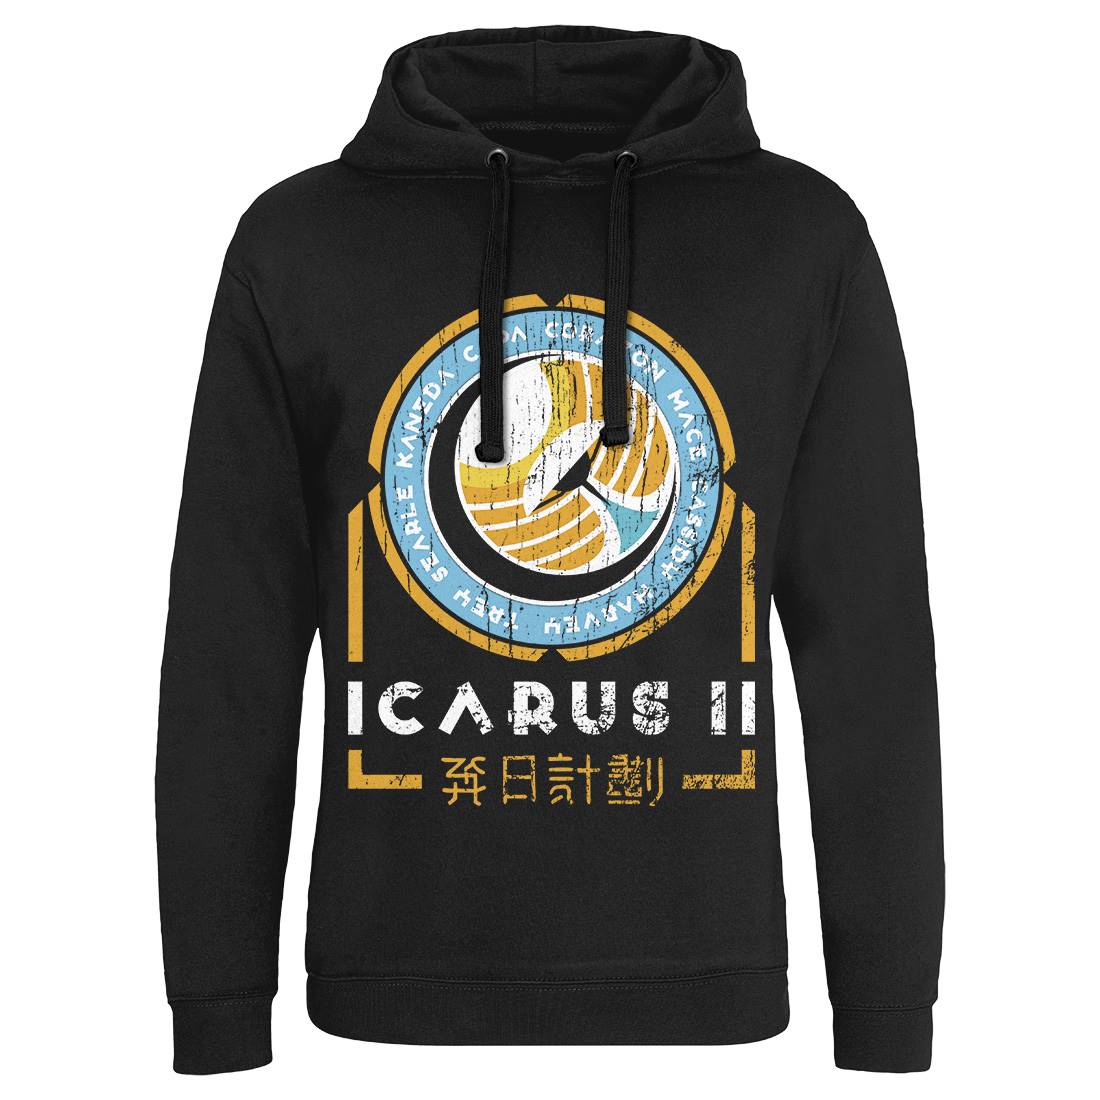 Icarus Ii Mens Hoodie Without Pocket Space D233